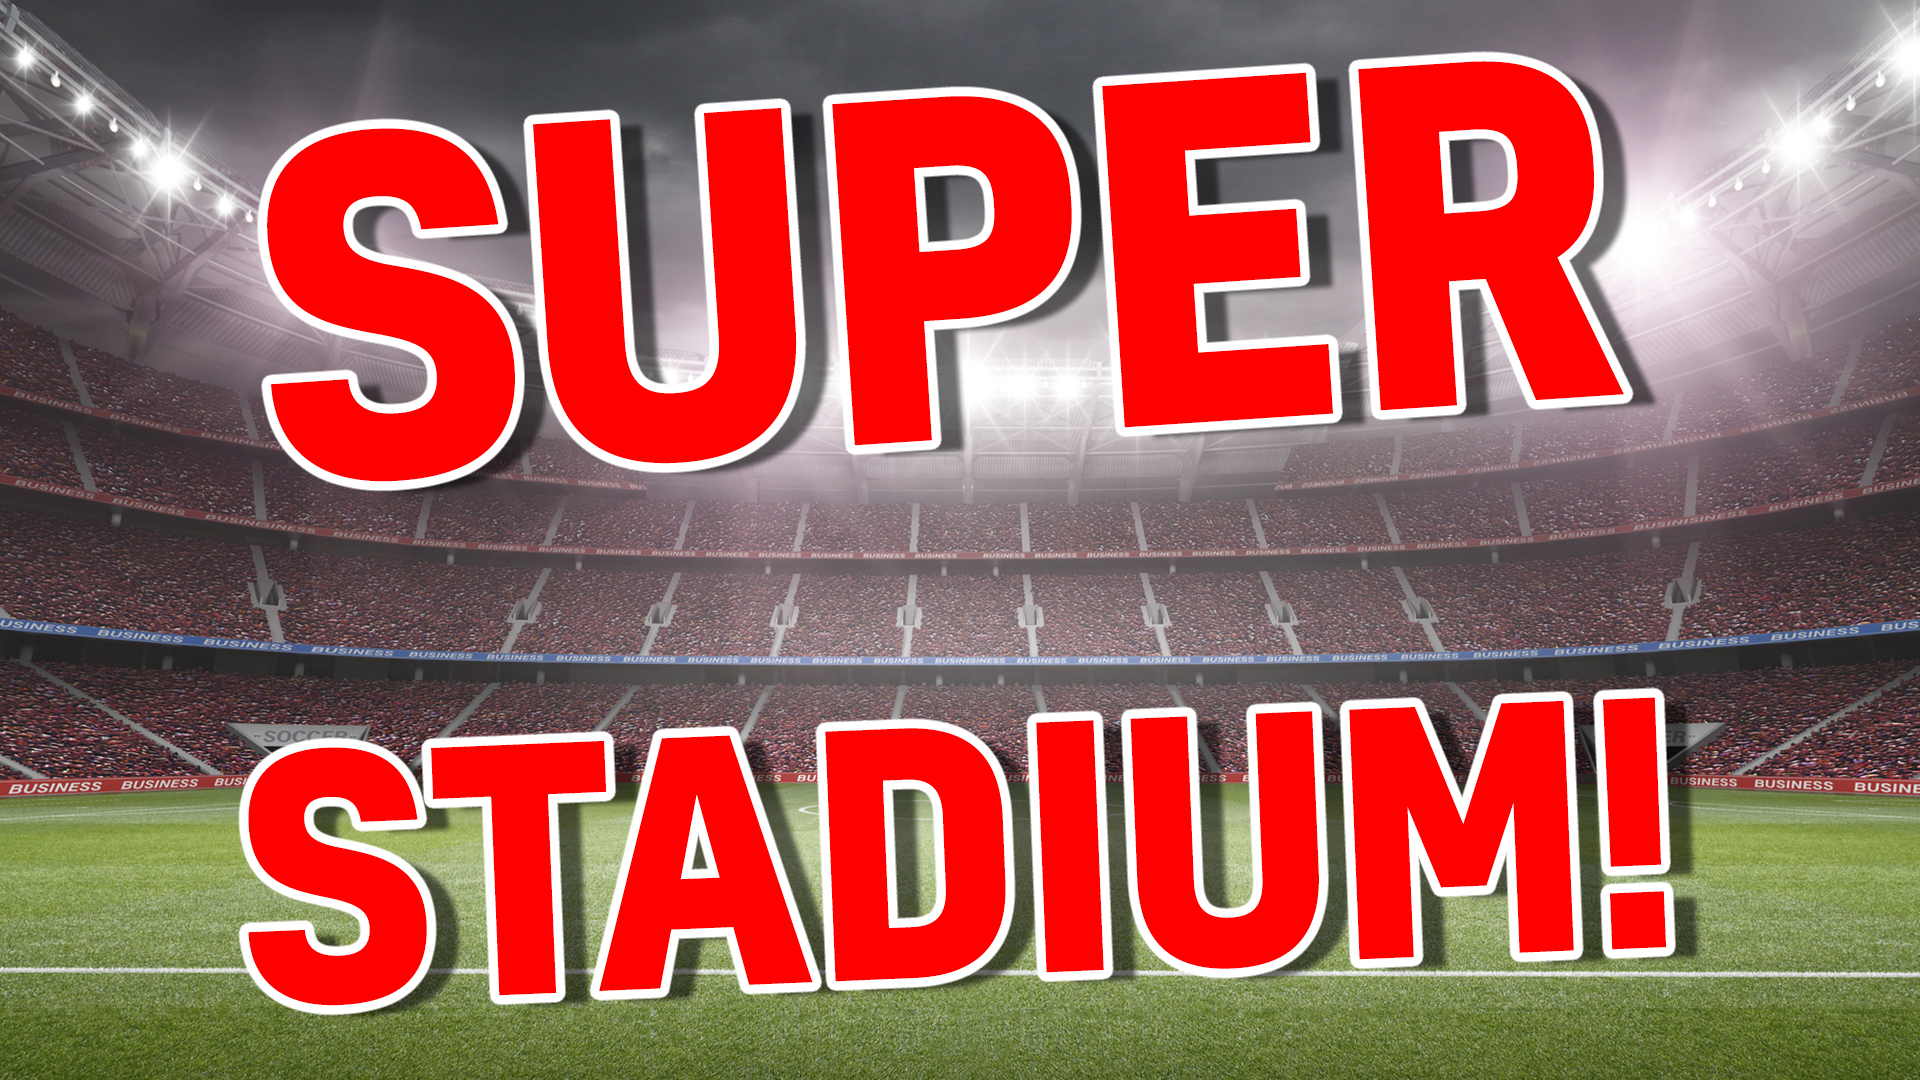 Your team will play in a: SUPER STADIUM!